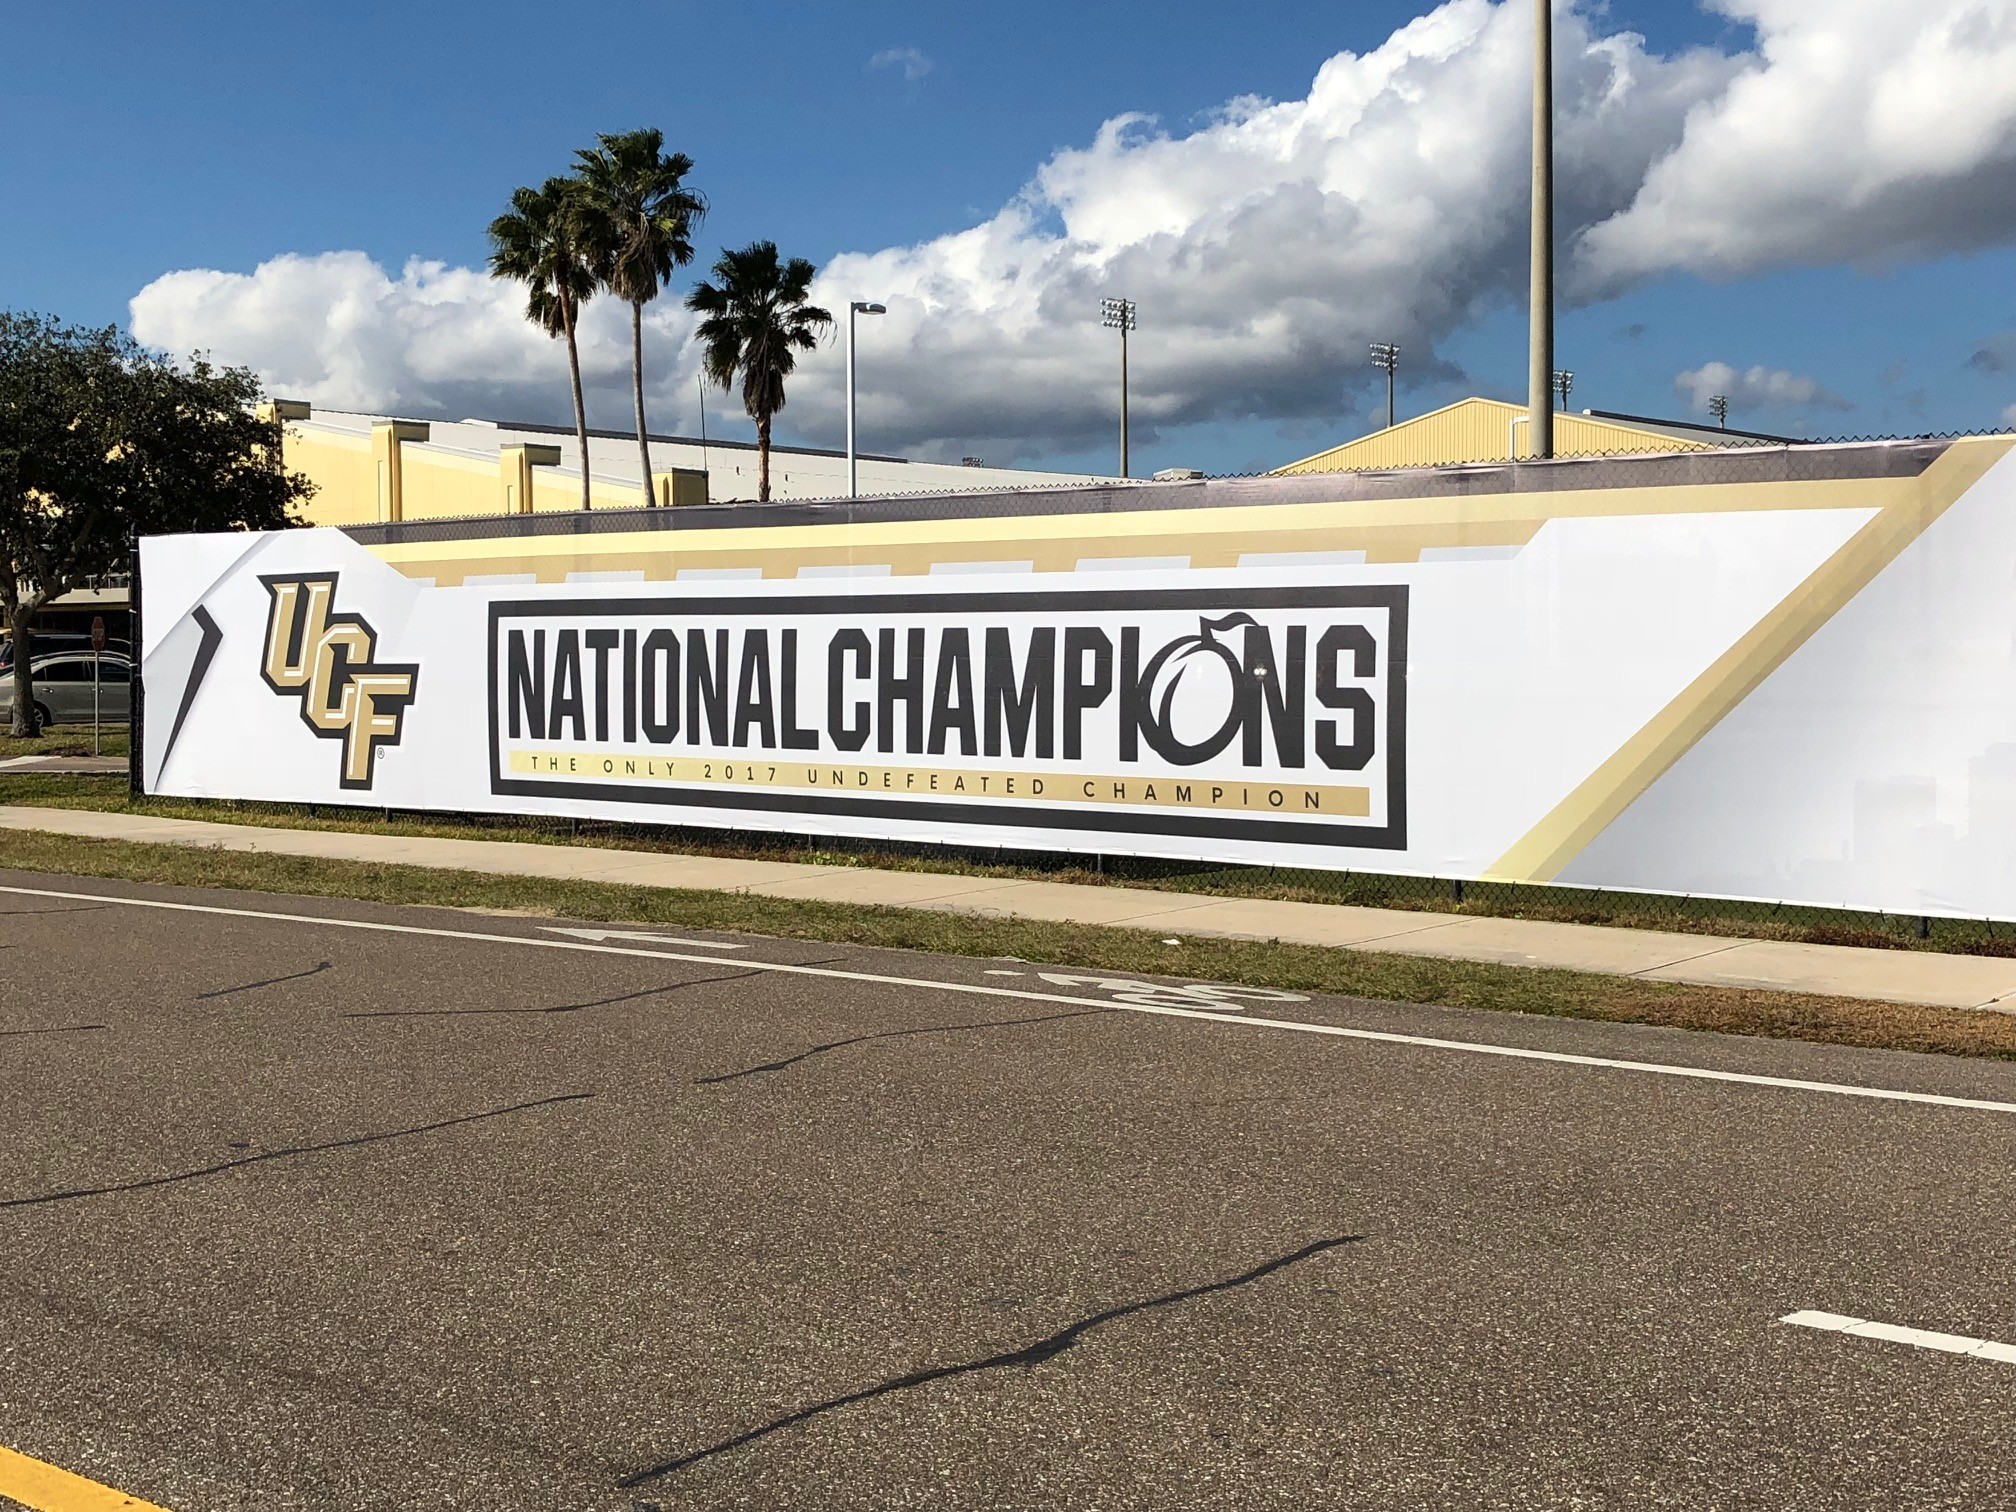 os-ucf-national-champions-banner-added-to-football-practice-field-20180122